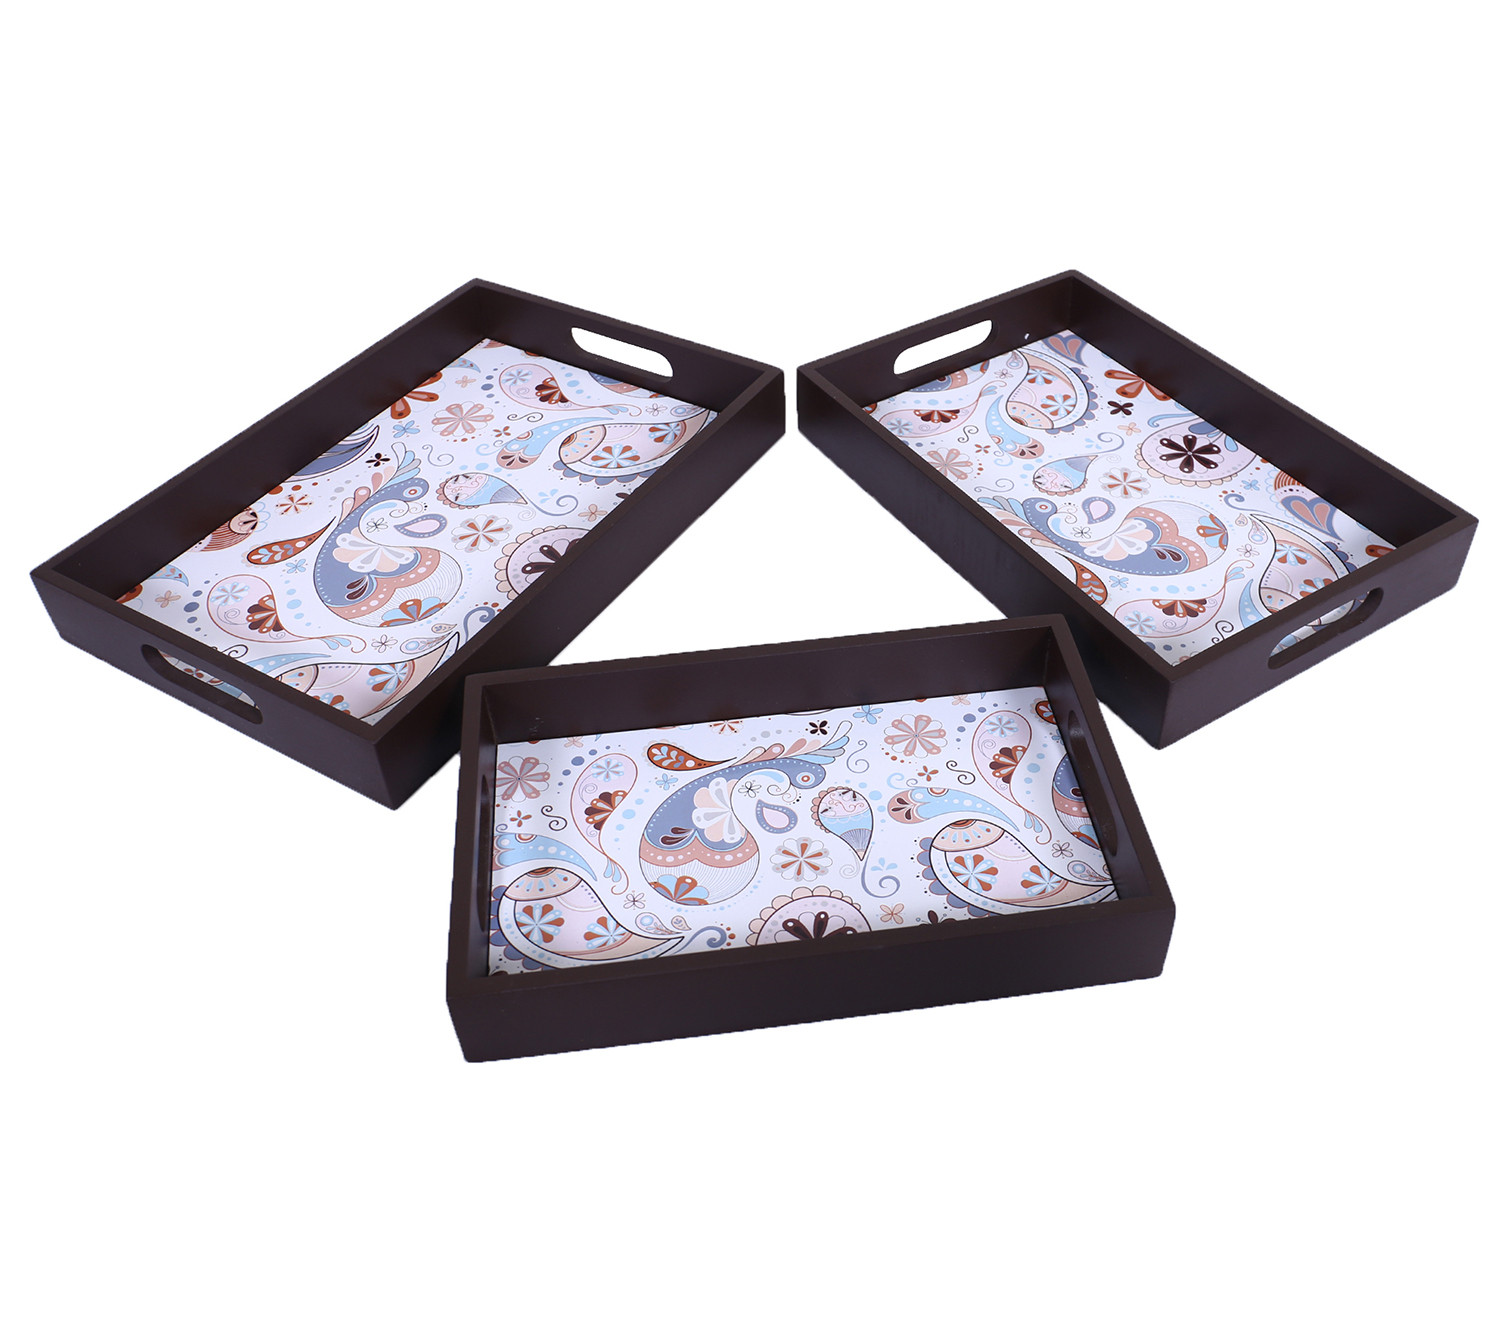 Kuber Industries Nested Serving Trays|Wooden Paisley Design Farmhouse Platter|Rectangular Shape Coffee Table Tray with Handles for Kitchen,Dining Area,Set of 3 (Brown)